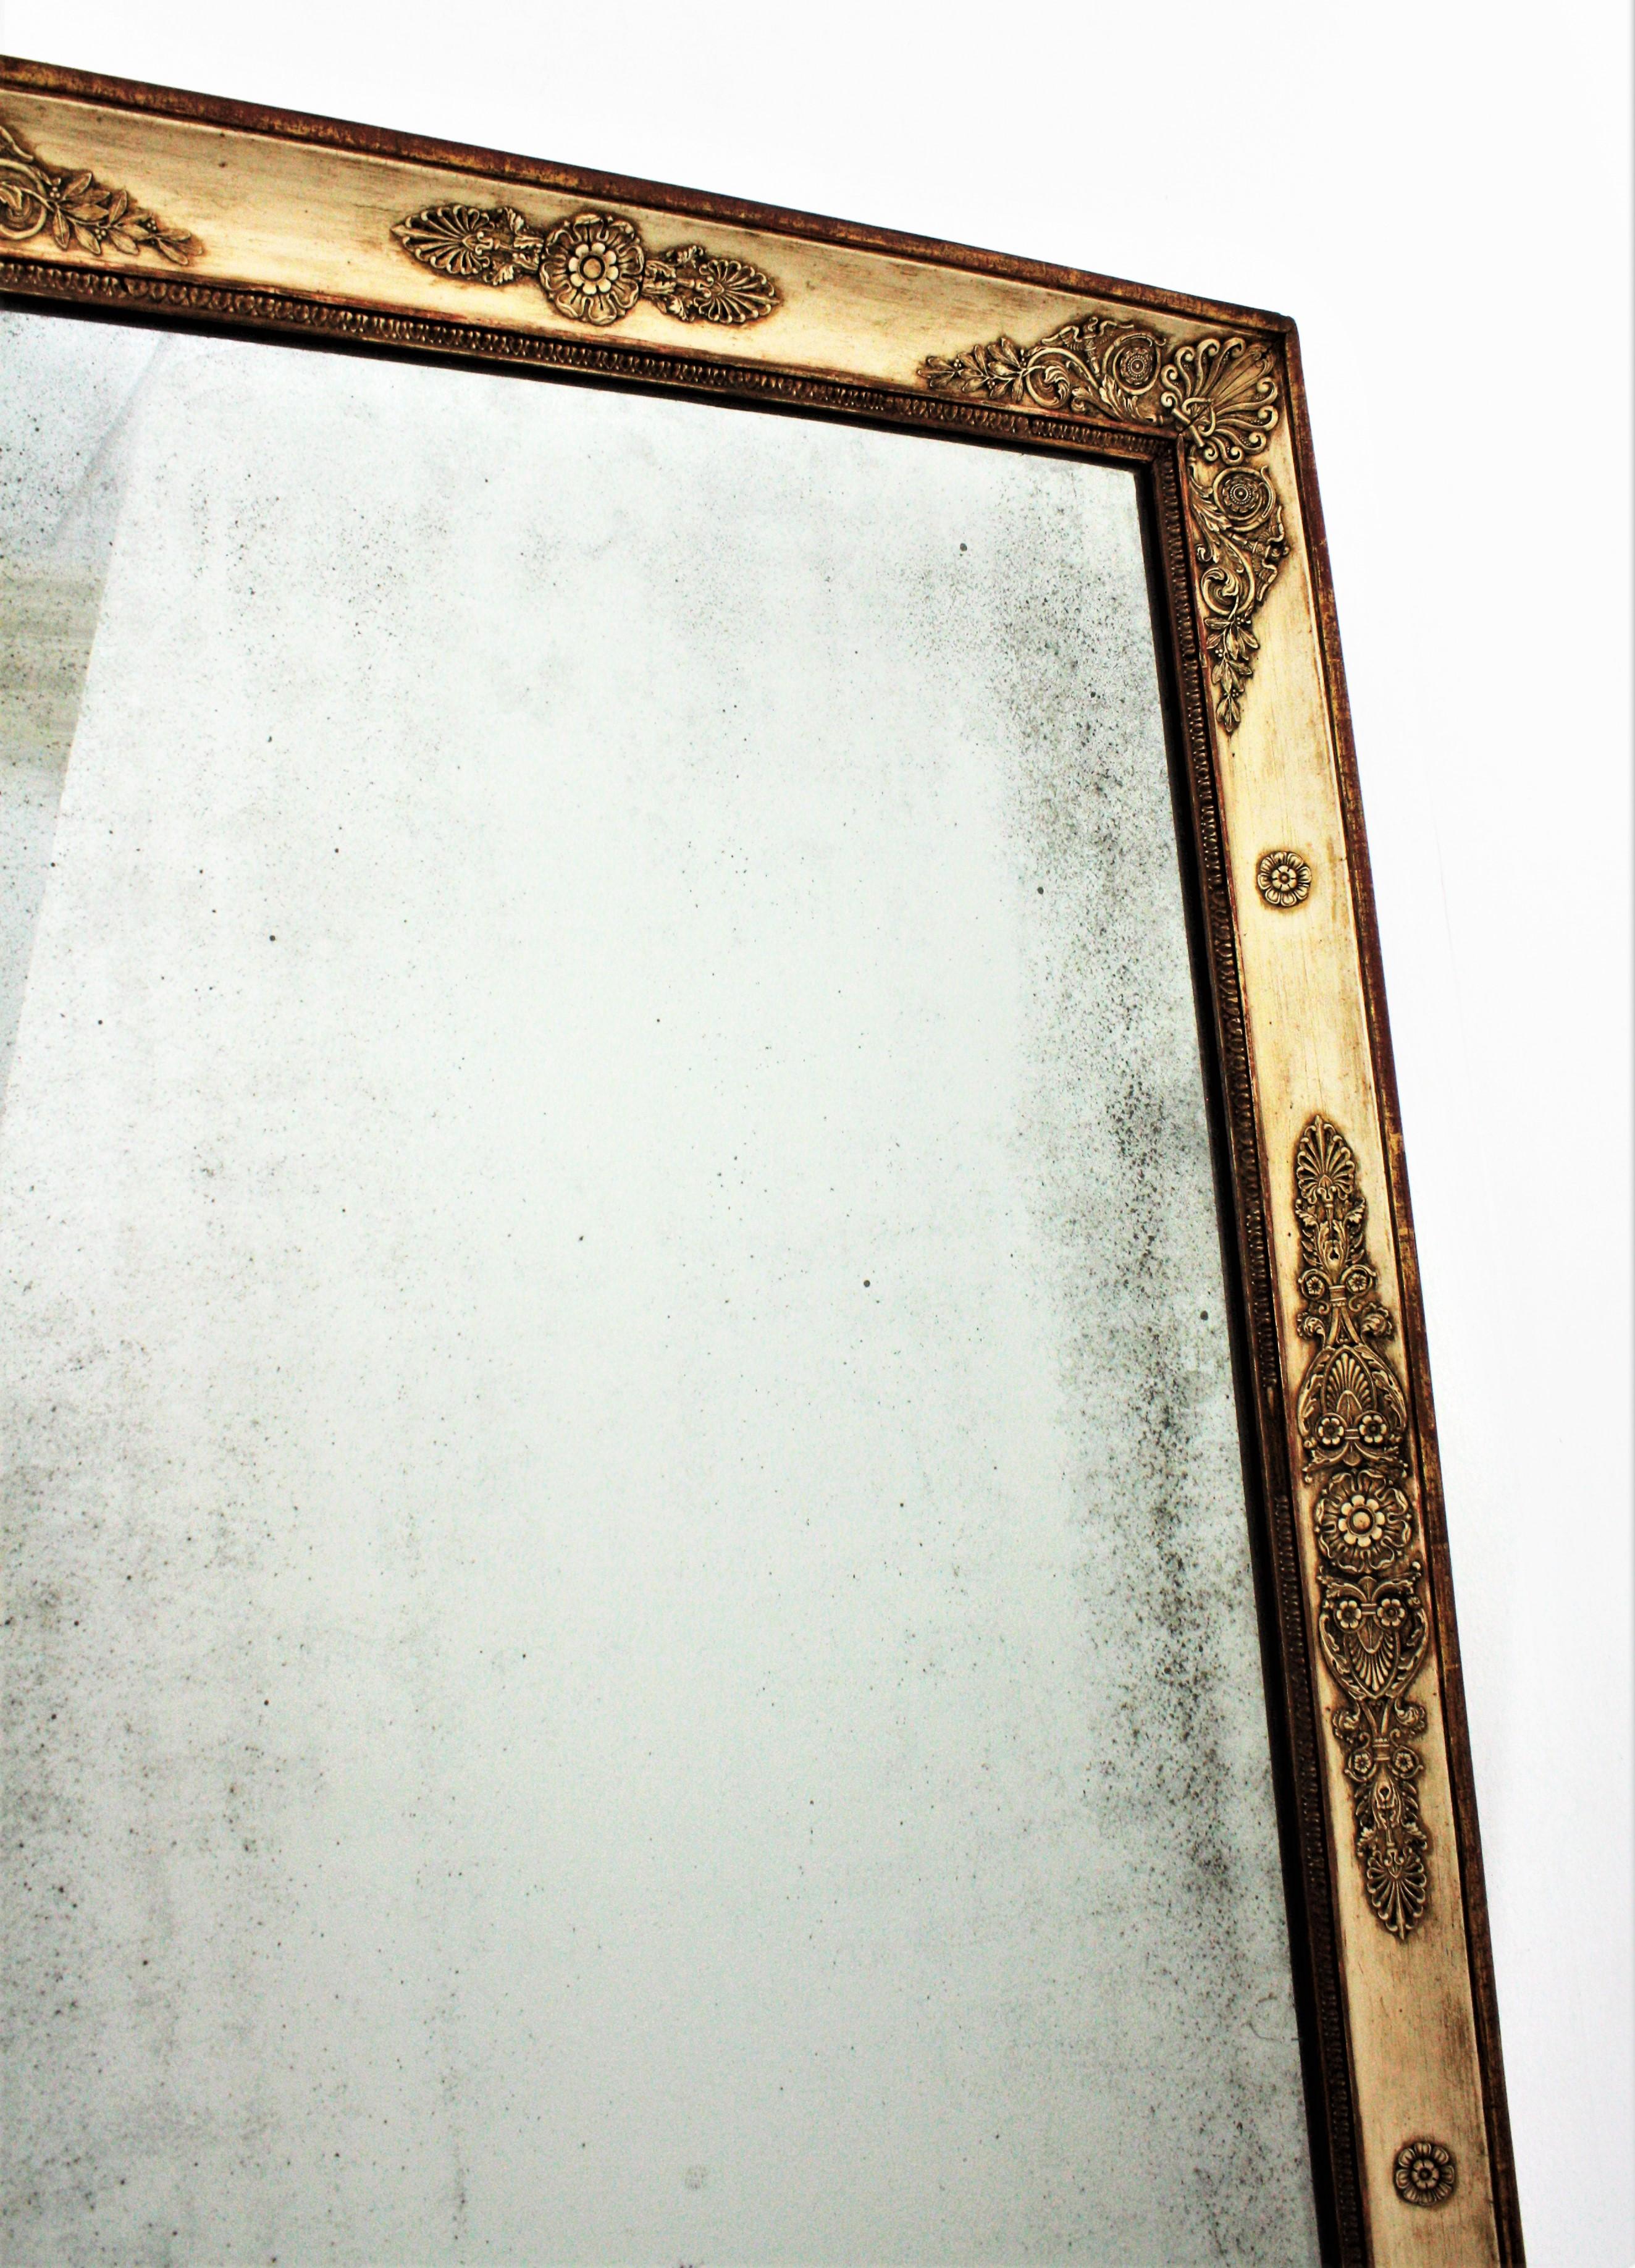 Large French Empire Parcel-Gilt and Beige Rectangular Mirror For Sale 8